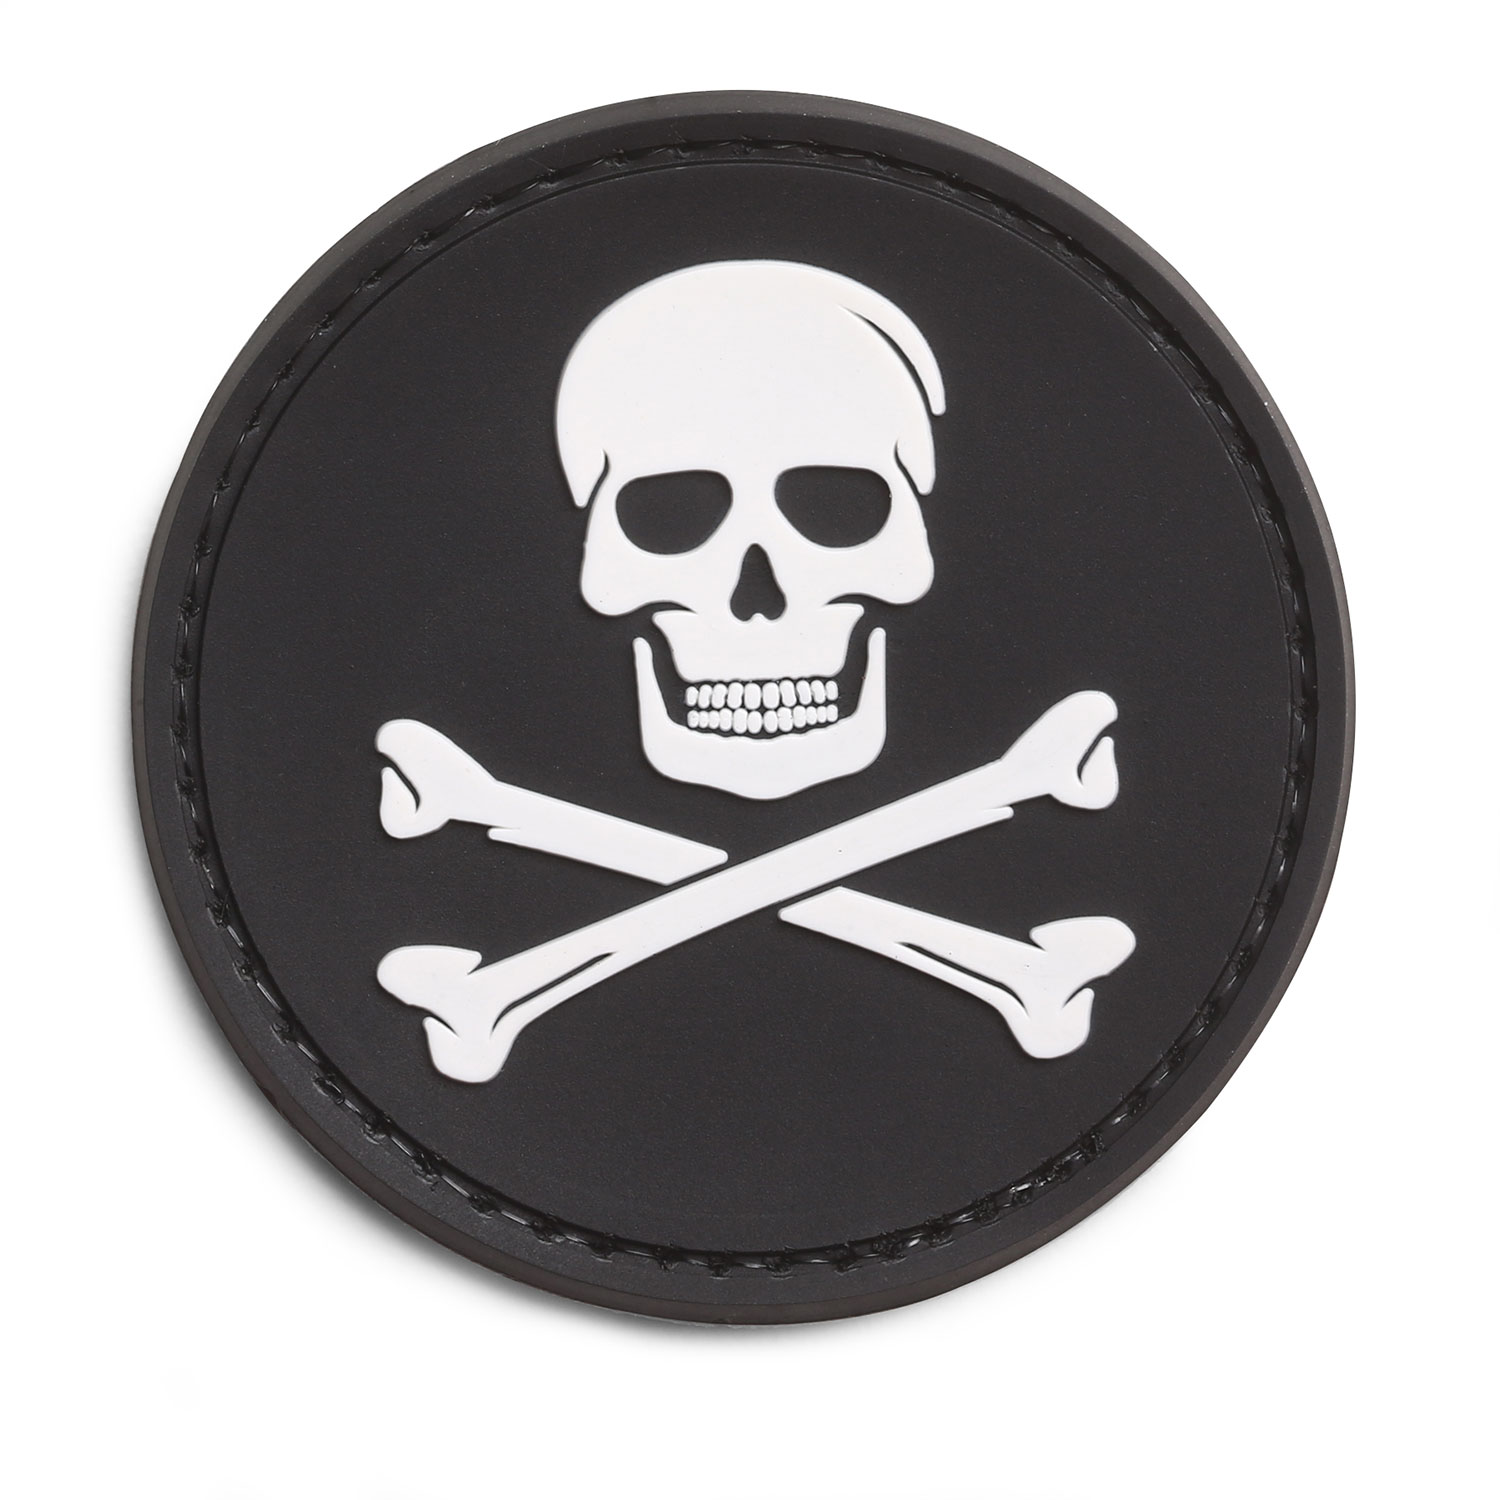 5ive Star Gear “Jolly Roger” Morale Patch